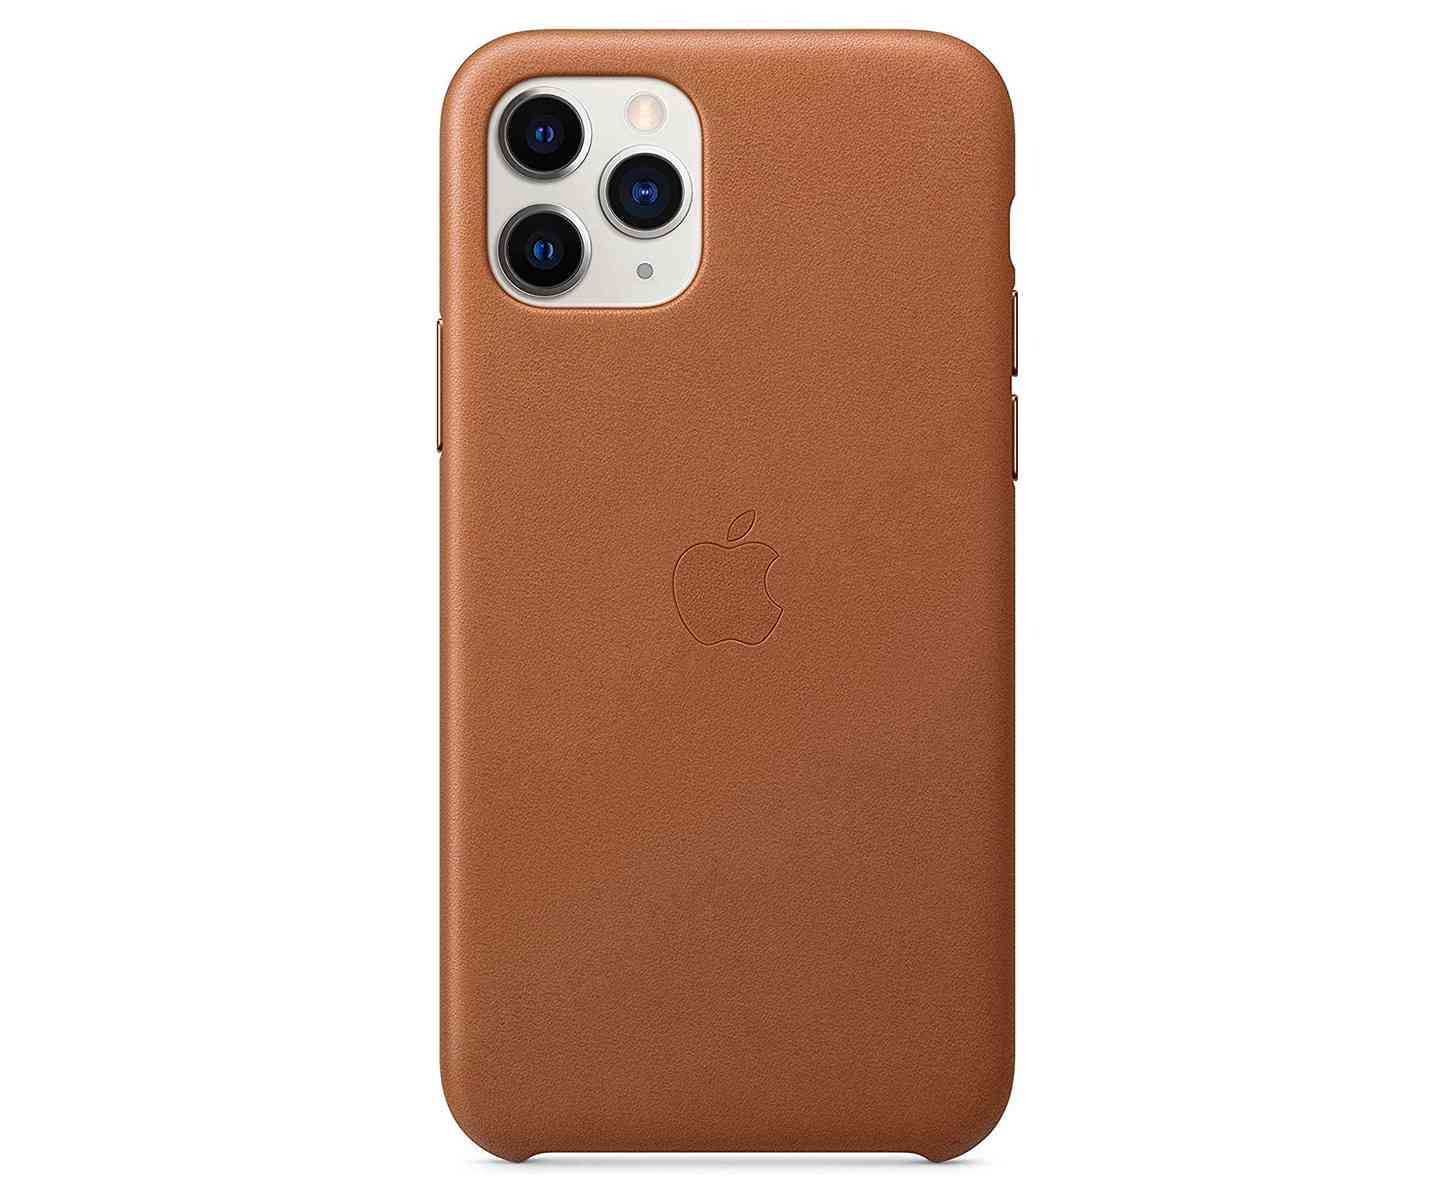 iPhone 11 Pro leather case